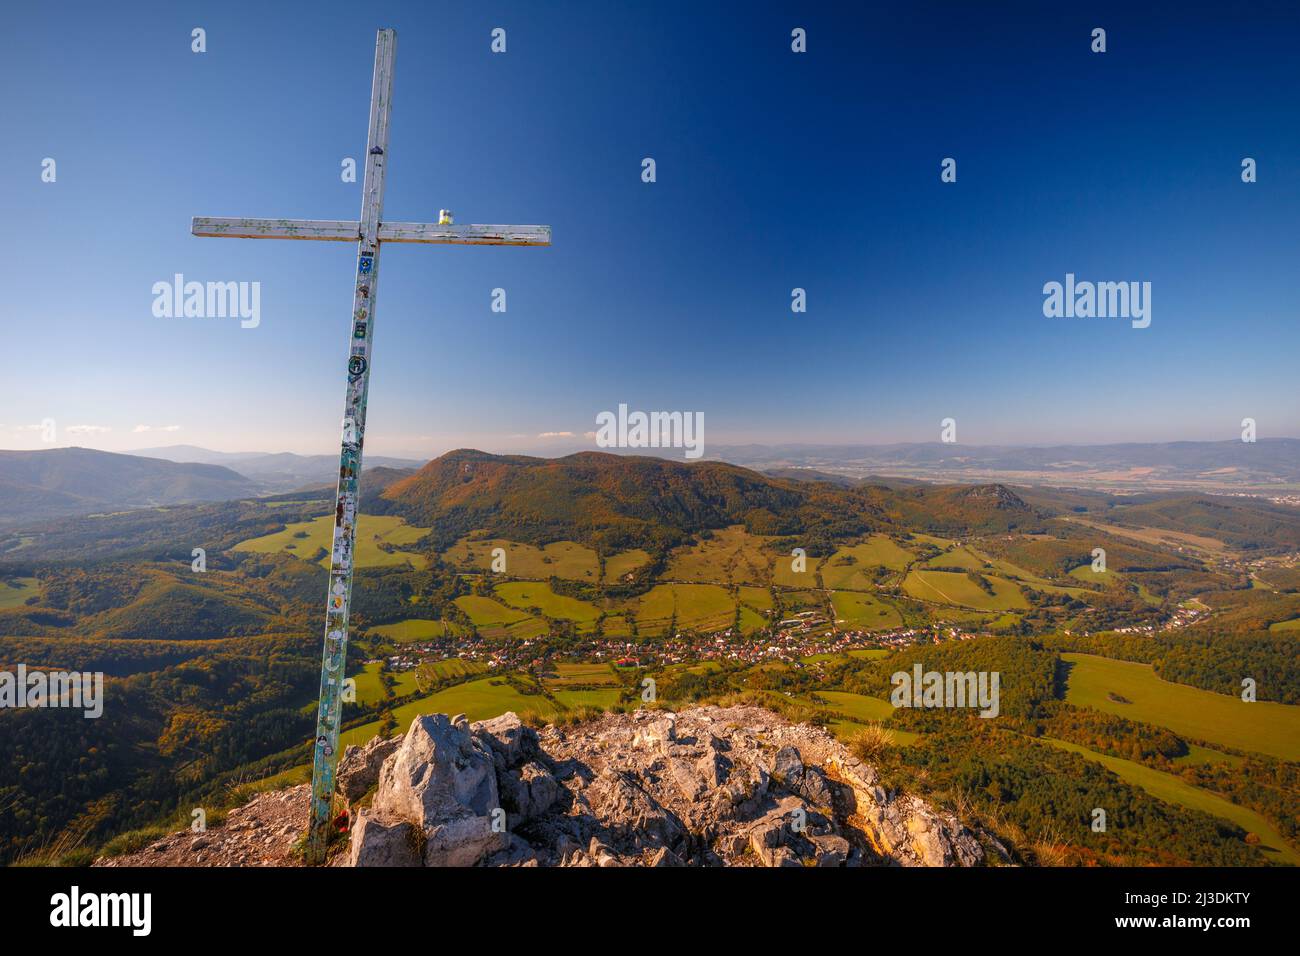 View from the top of The Vapec hill in The Strazov Mountains in northwestern Slovakia at autumn, Europe. Stock Photo